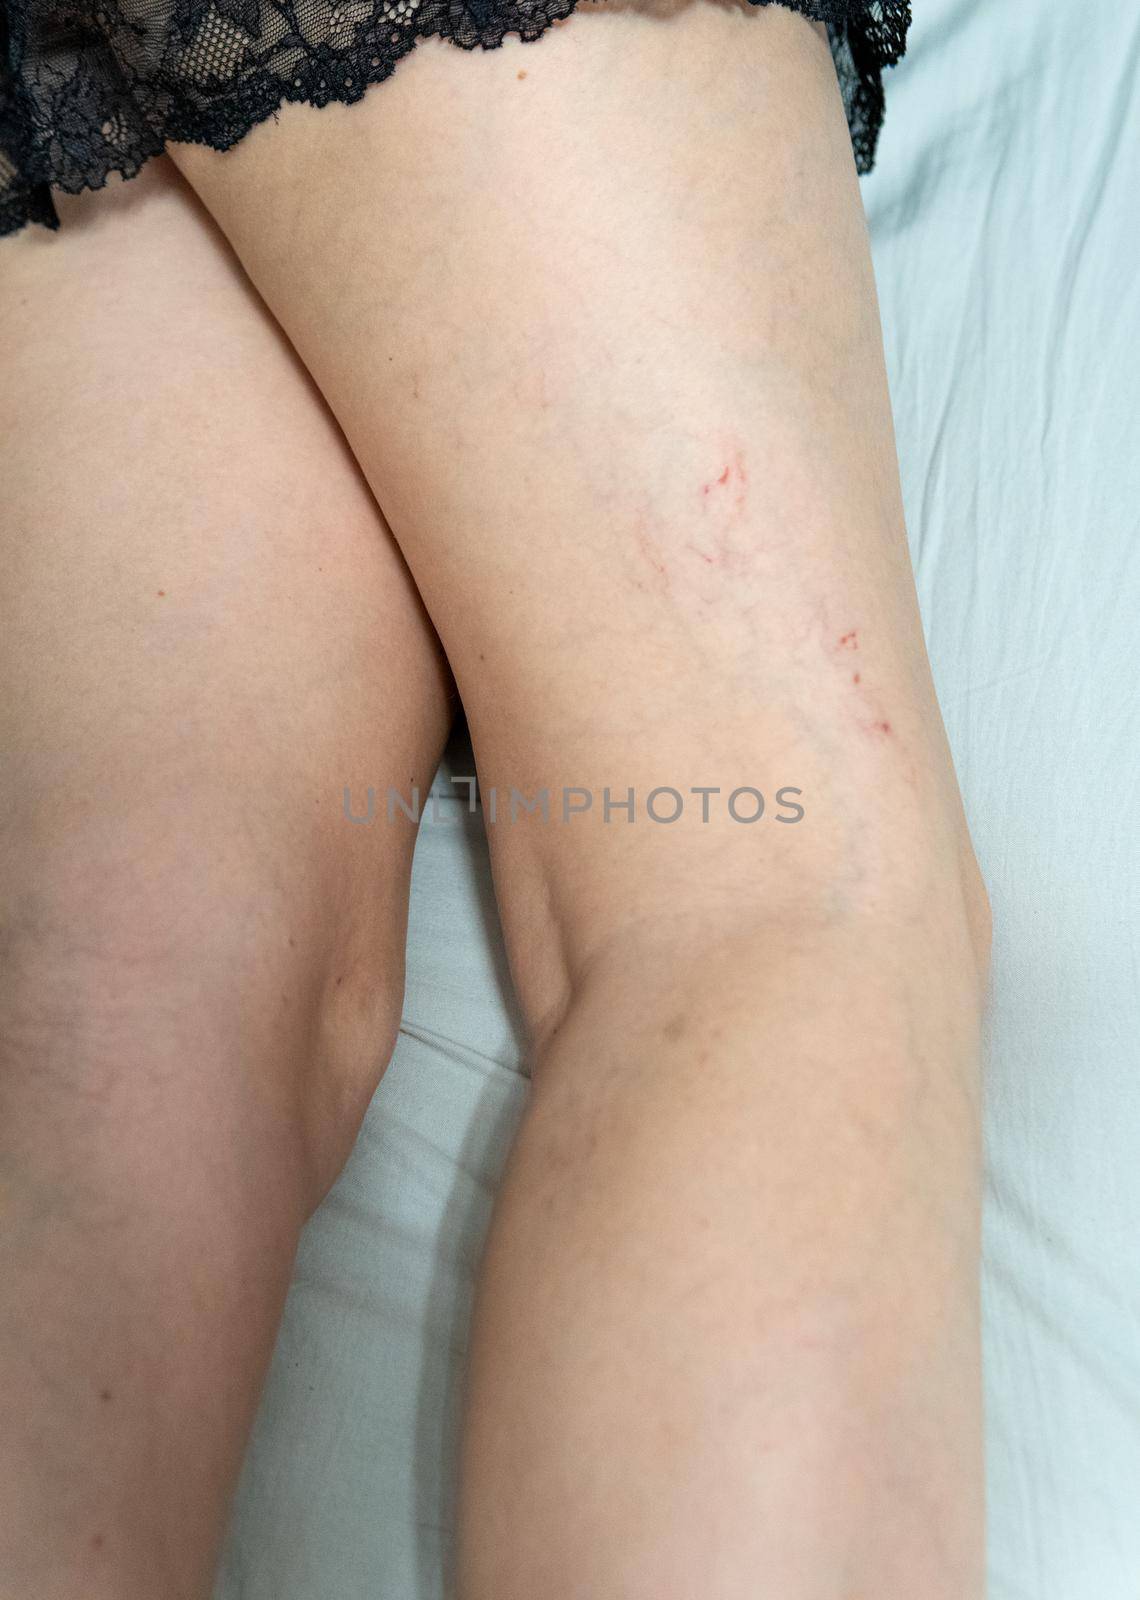 removal of blood vessels by laser thrombosis body blood, leg treatment painful health cutout anatomy. Phlebitis risk twisted, up telangiectases physical by 89167702191